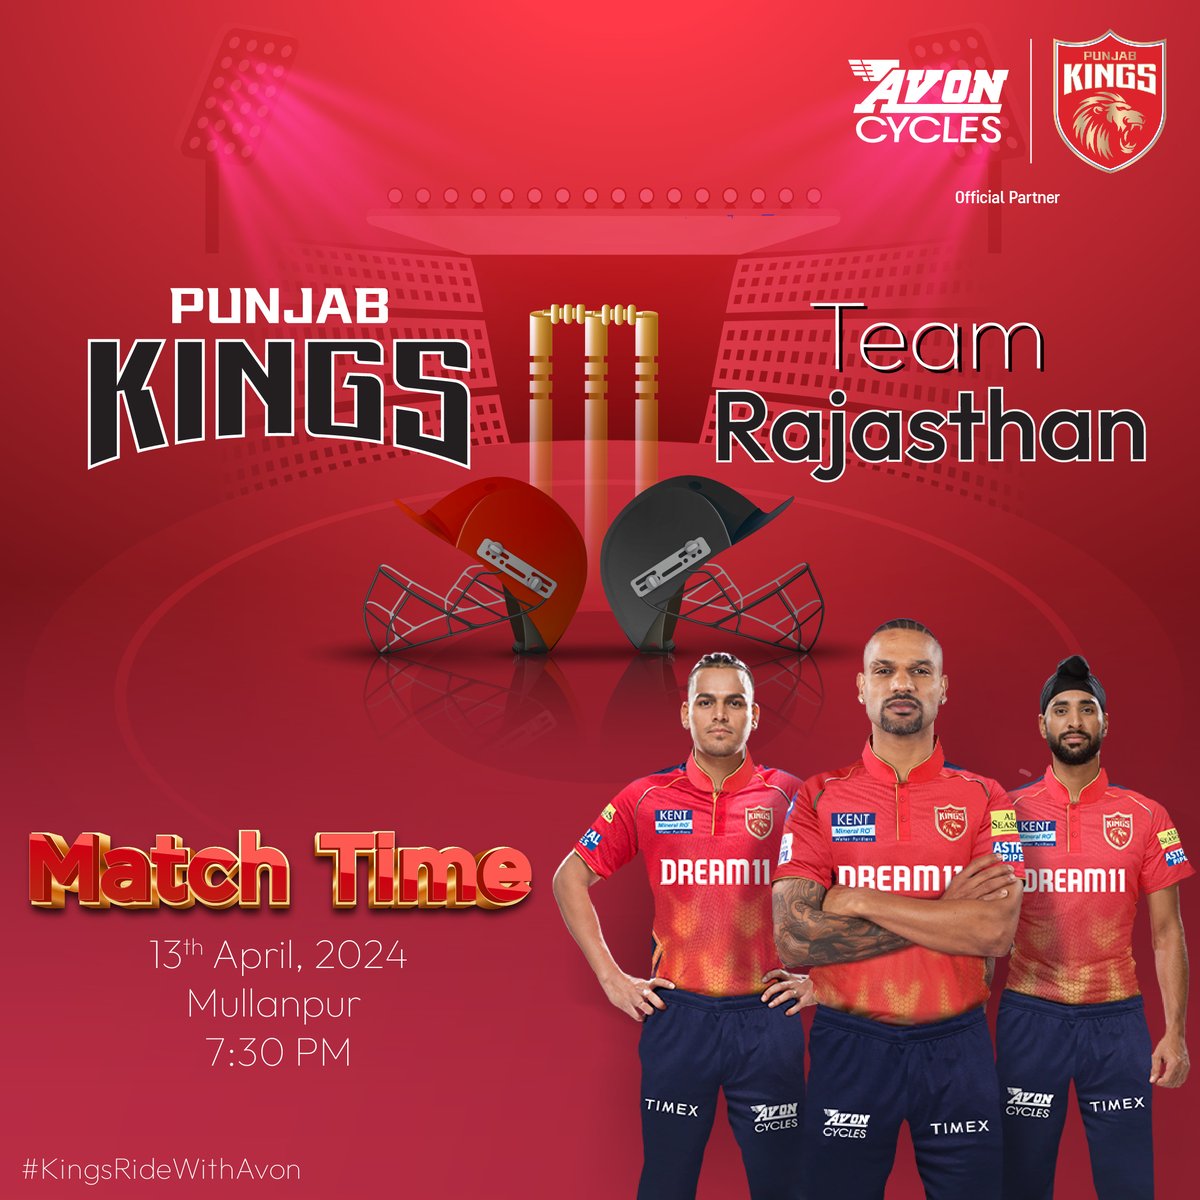 Sending our best wishes to the Punjab Kings players as they gear up for their match against Rajasthan tomorrow in Mullanpur! Bring home the victory, #JazbaHaiPunjabi #SaddaPunjab #PBKSvsRajasthan #T20Match #KingsRideWithAvon #JazbaHaiPunjabi